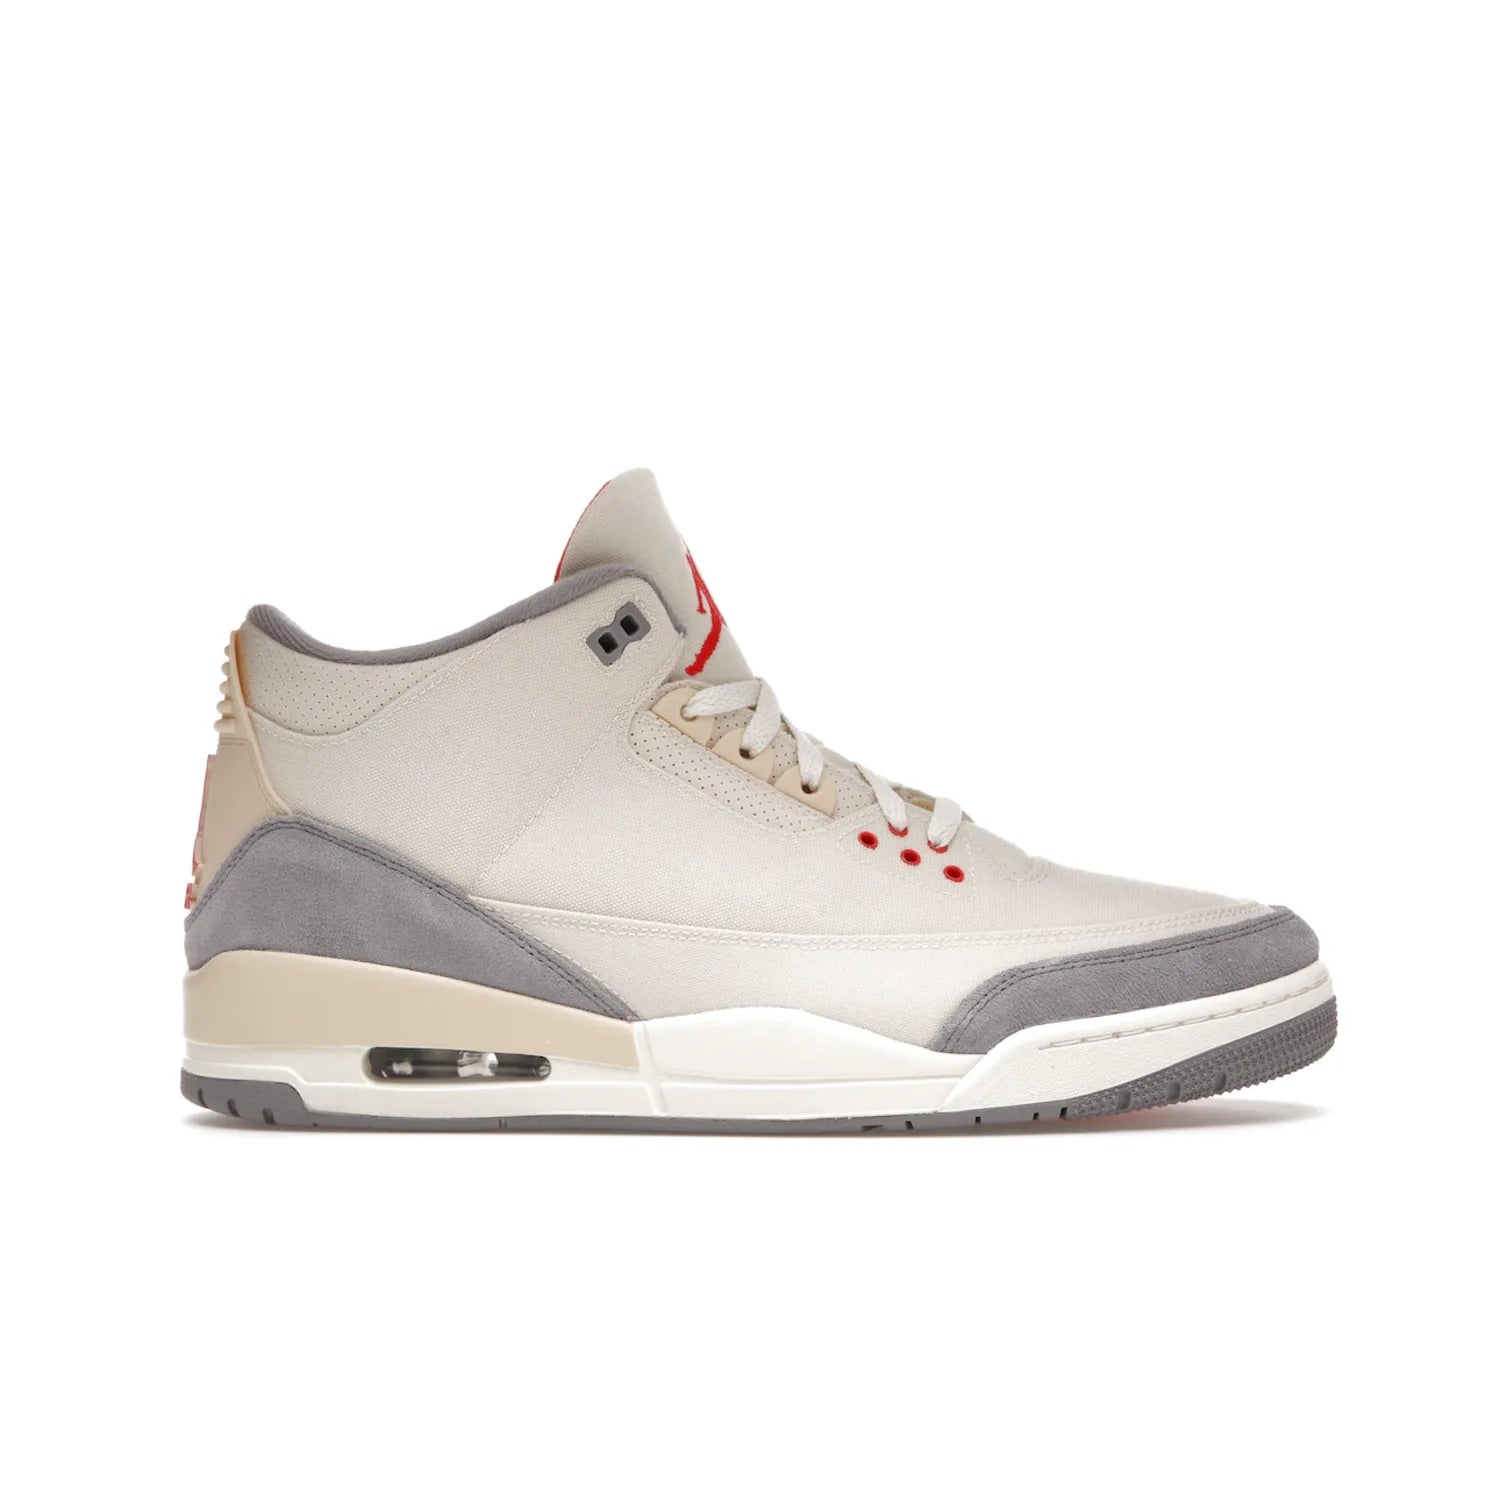 Jordan 3 Retro Muslin - Image 1 - Only at www.BallersClubKickz.com - Eye-catching Air Jordan 3 Retro Muslin in a neutral palette of grey, cream, and red. Featuring canvas upper, suede overlays and white/grey Air Max sole. Available in March 2022.